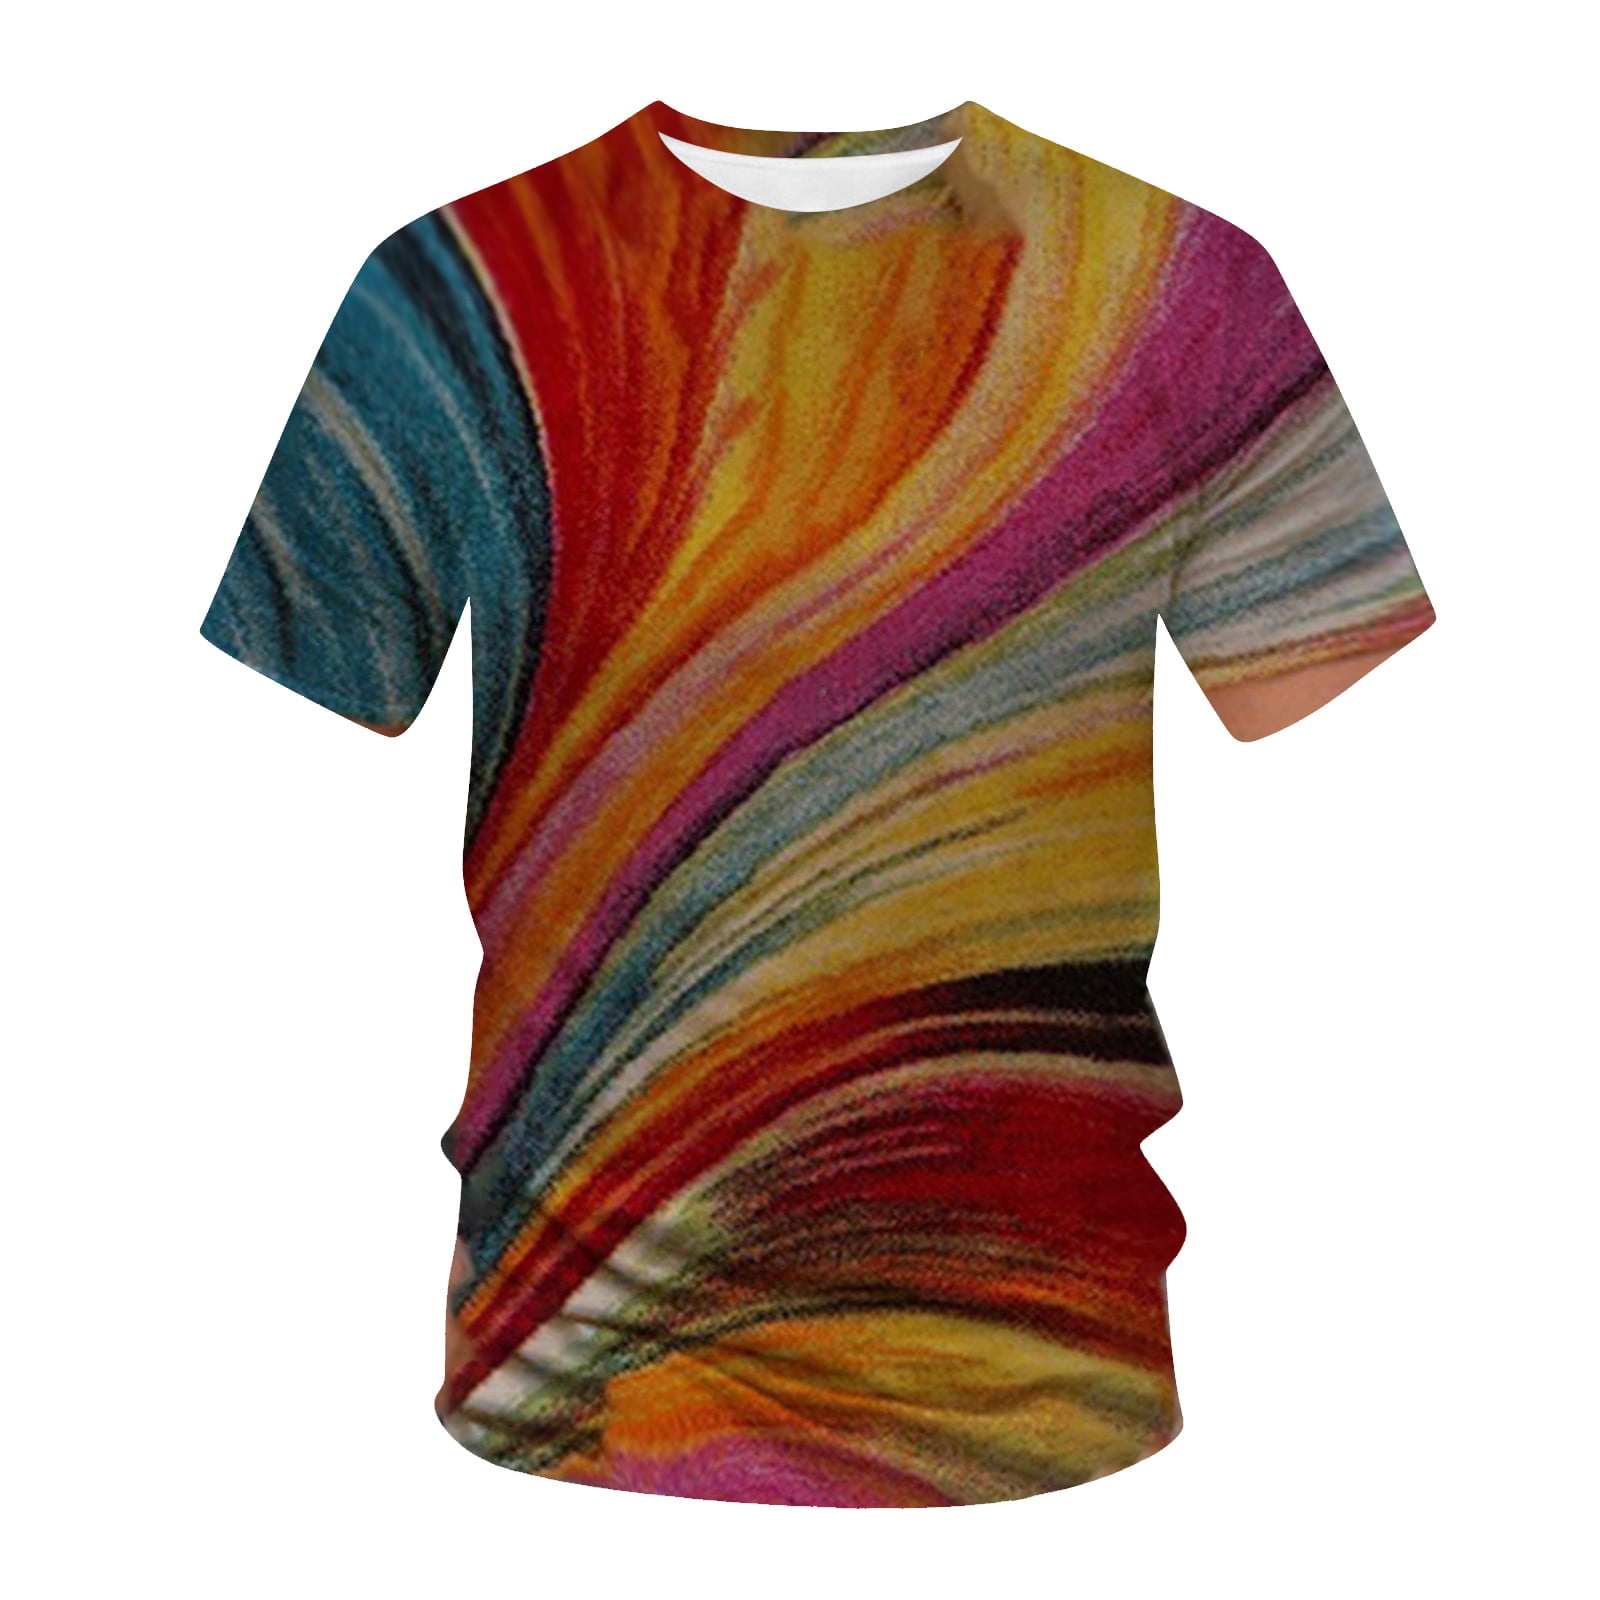 Fashion Mens Summer T-Shirt Short Sleeve Round Neck Printed 3D Glass Bottle Stripe Pattern Tops for Gym Sport Casual Plain Comfy Daily Wear Pullover Tees 